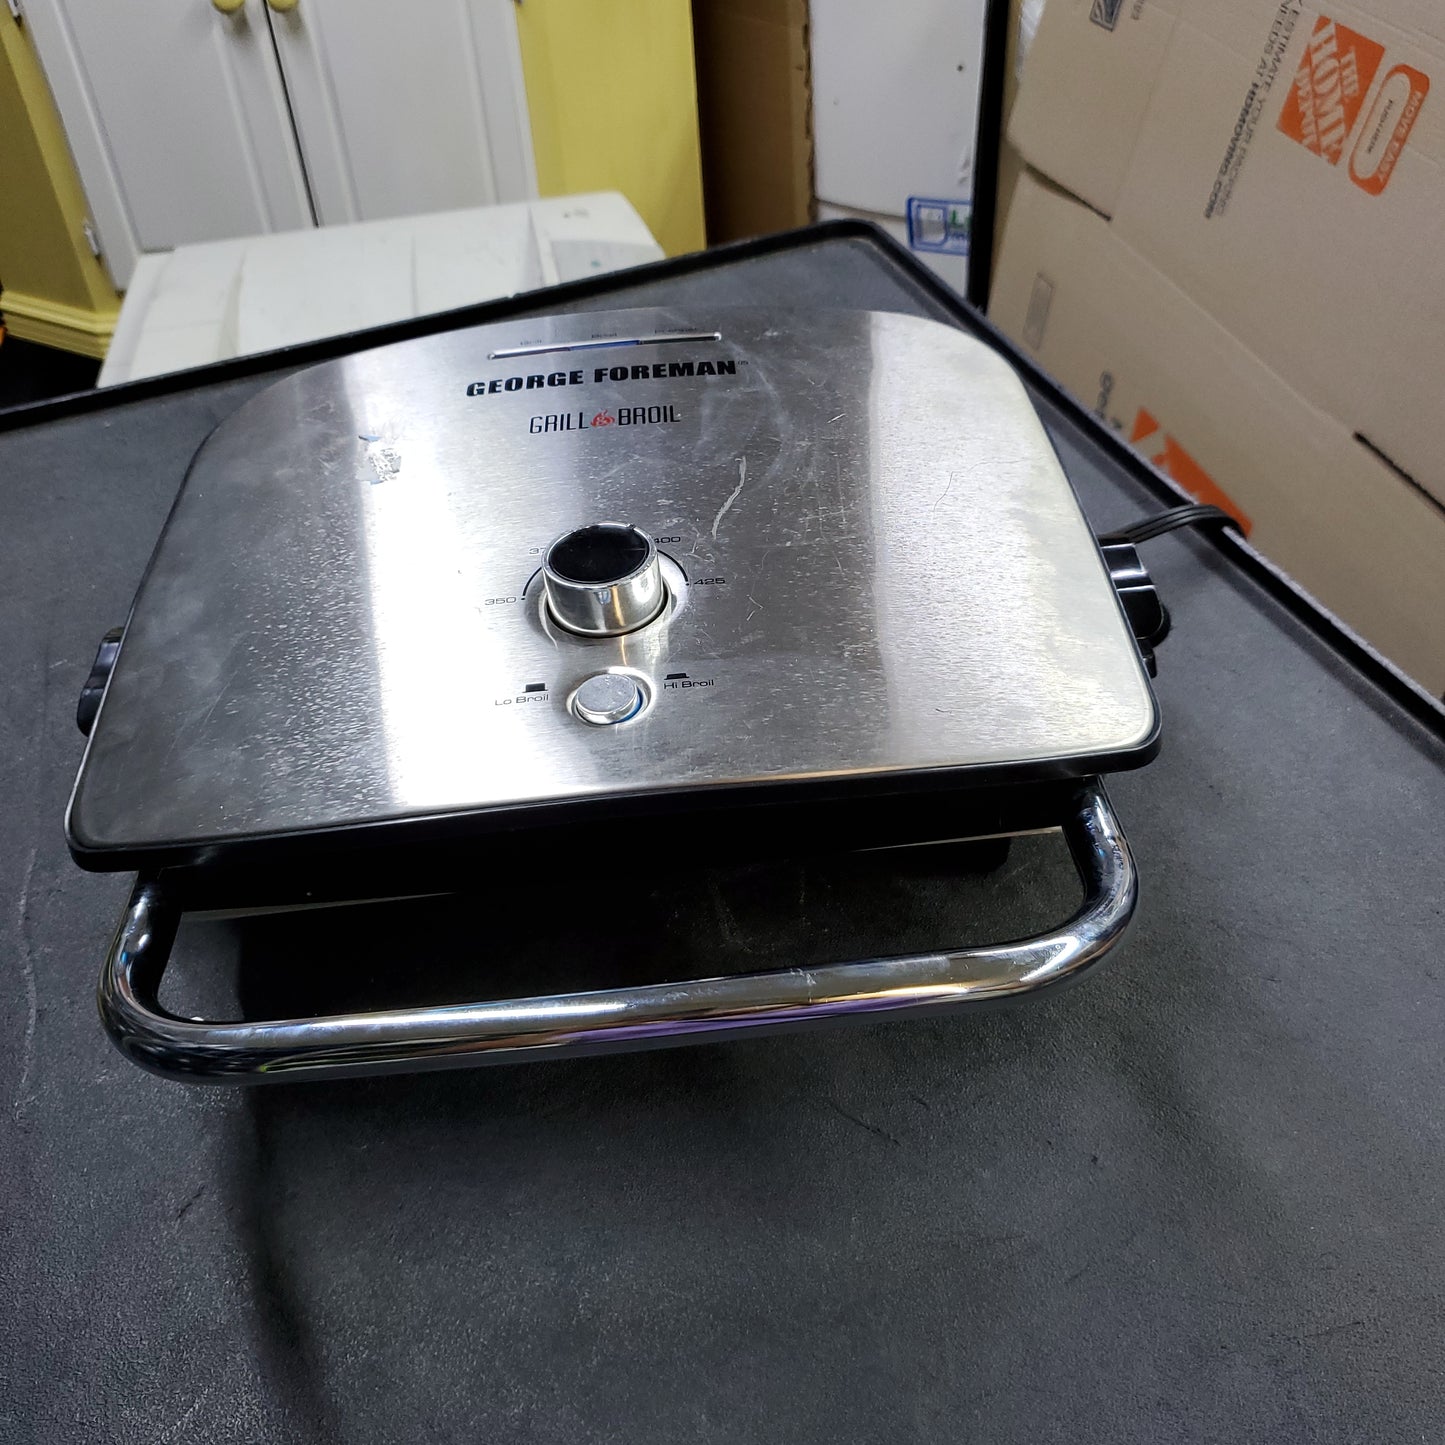 George Foreman Grill: Grill & Broil